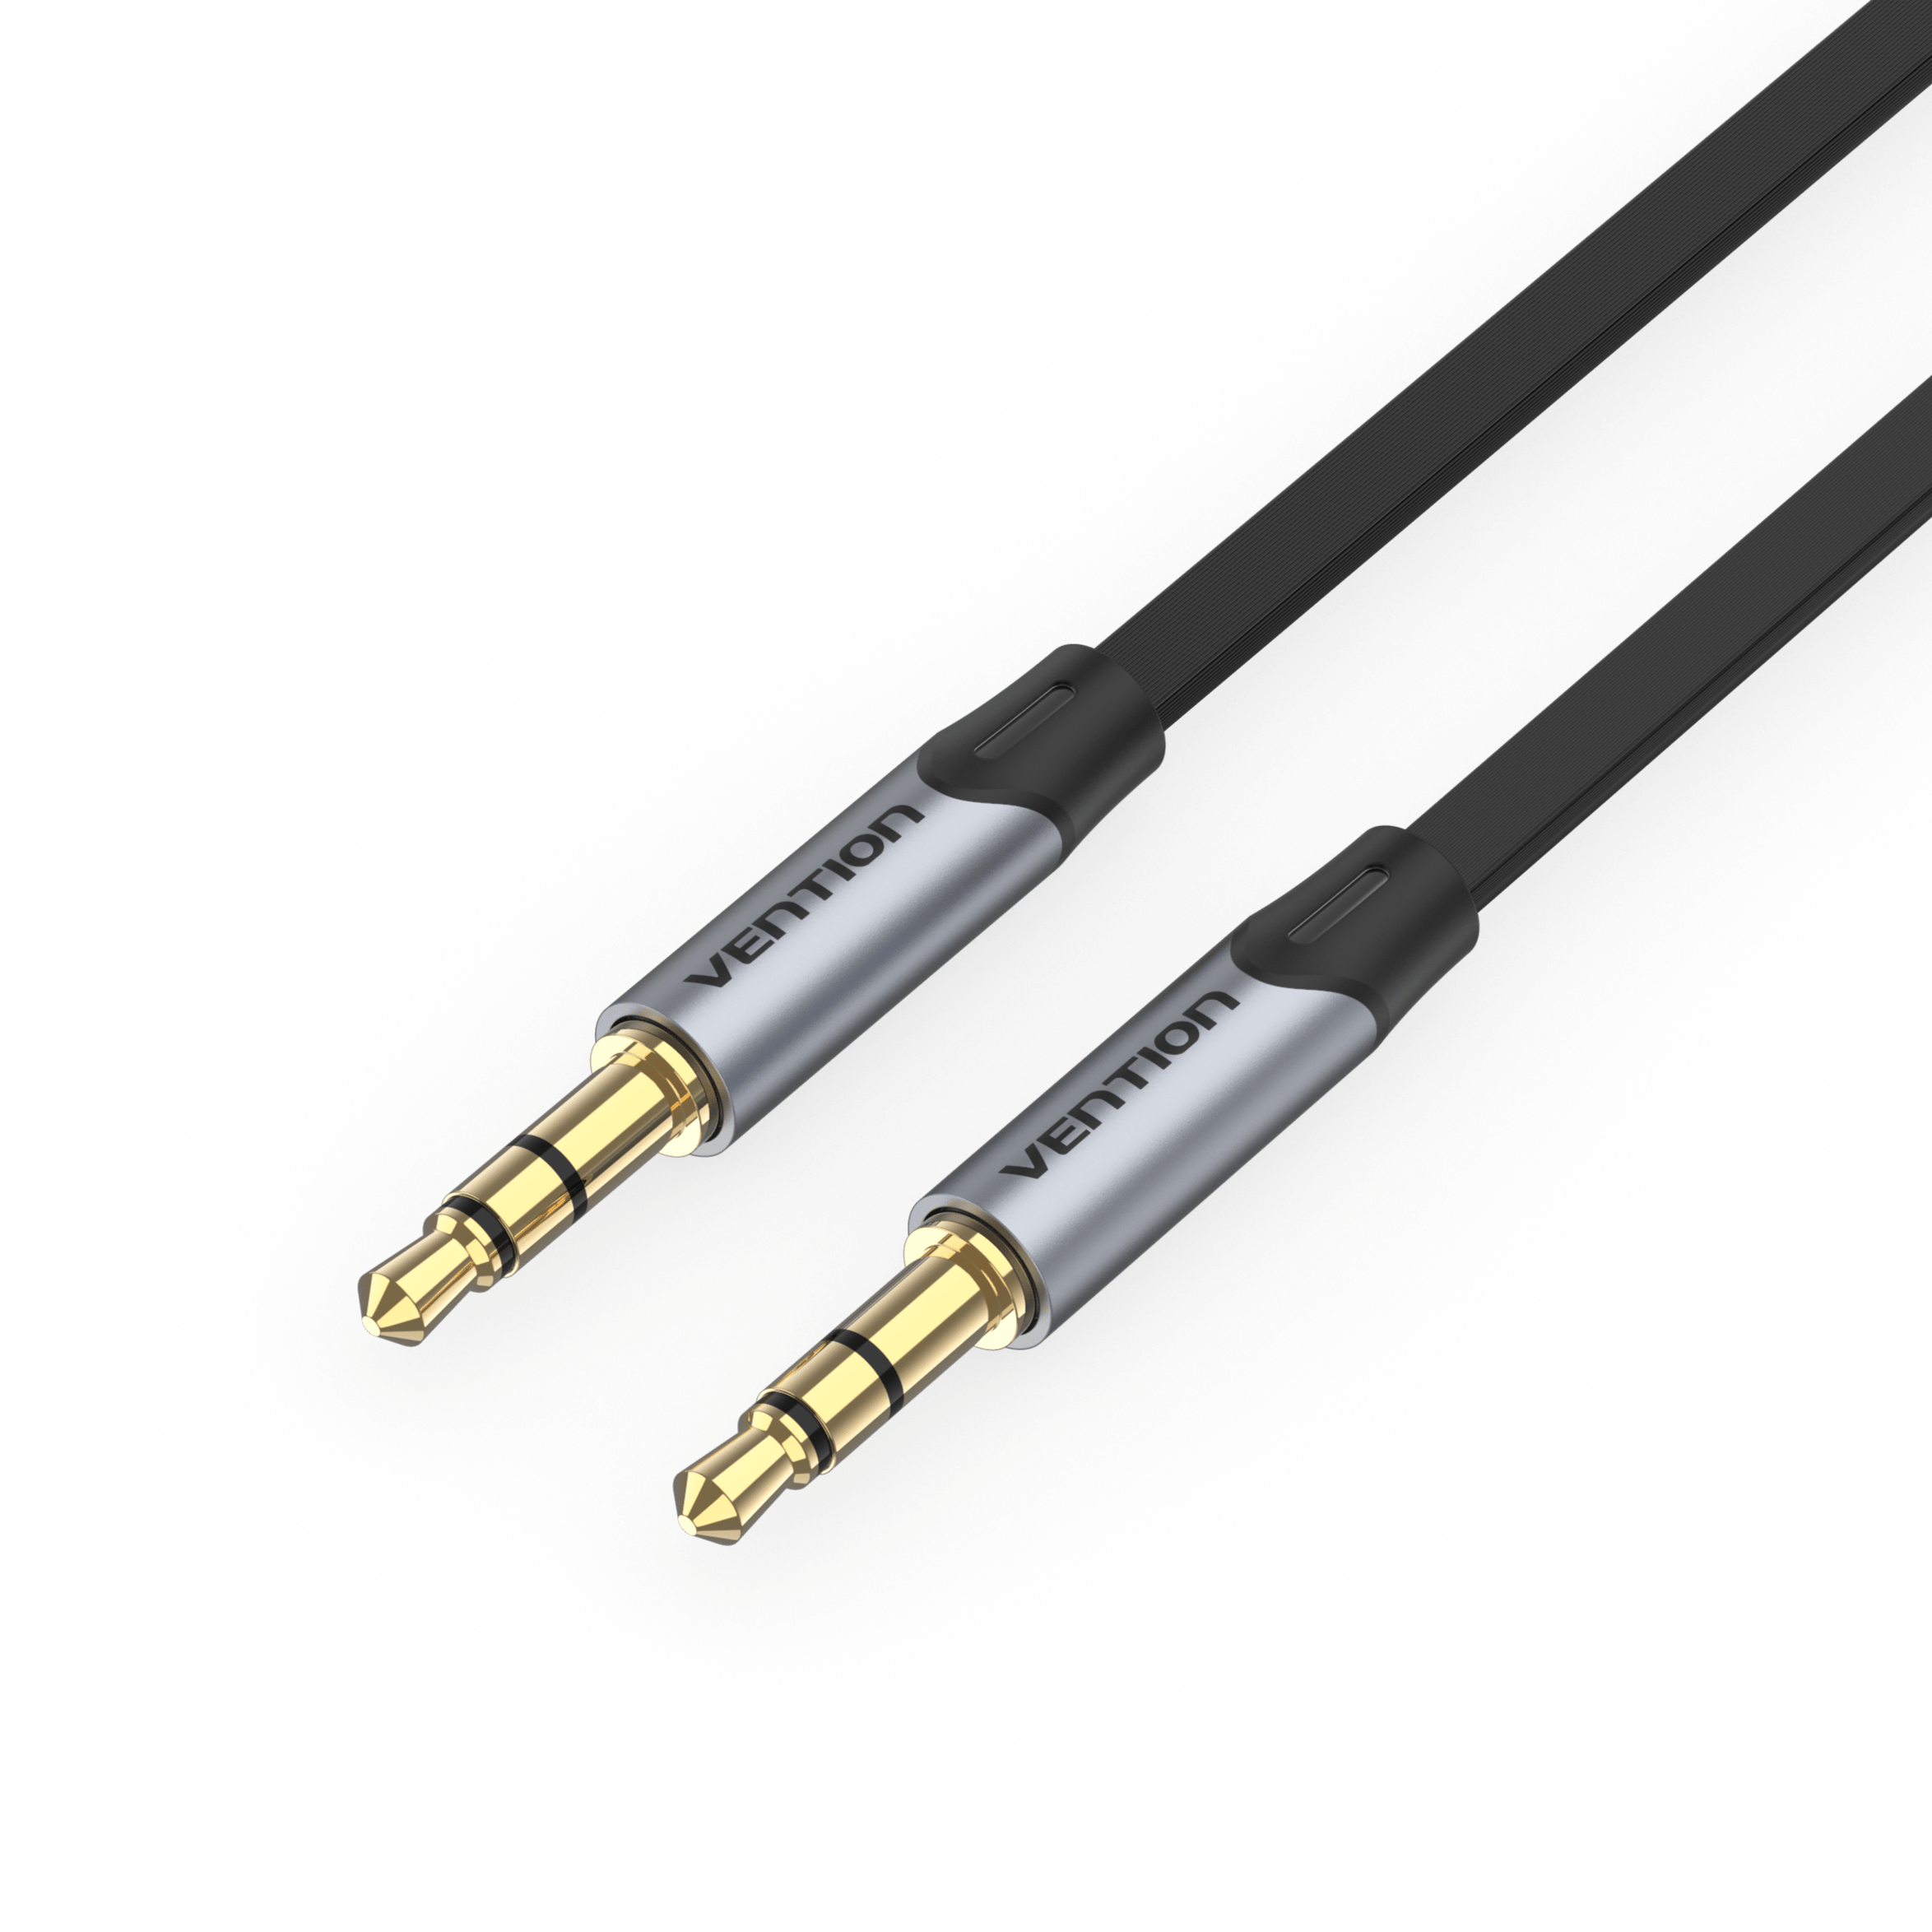 Stereo RCA-3.5mm Cables – U-Turn Audio